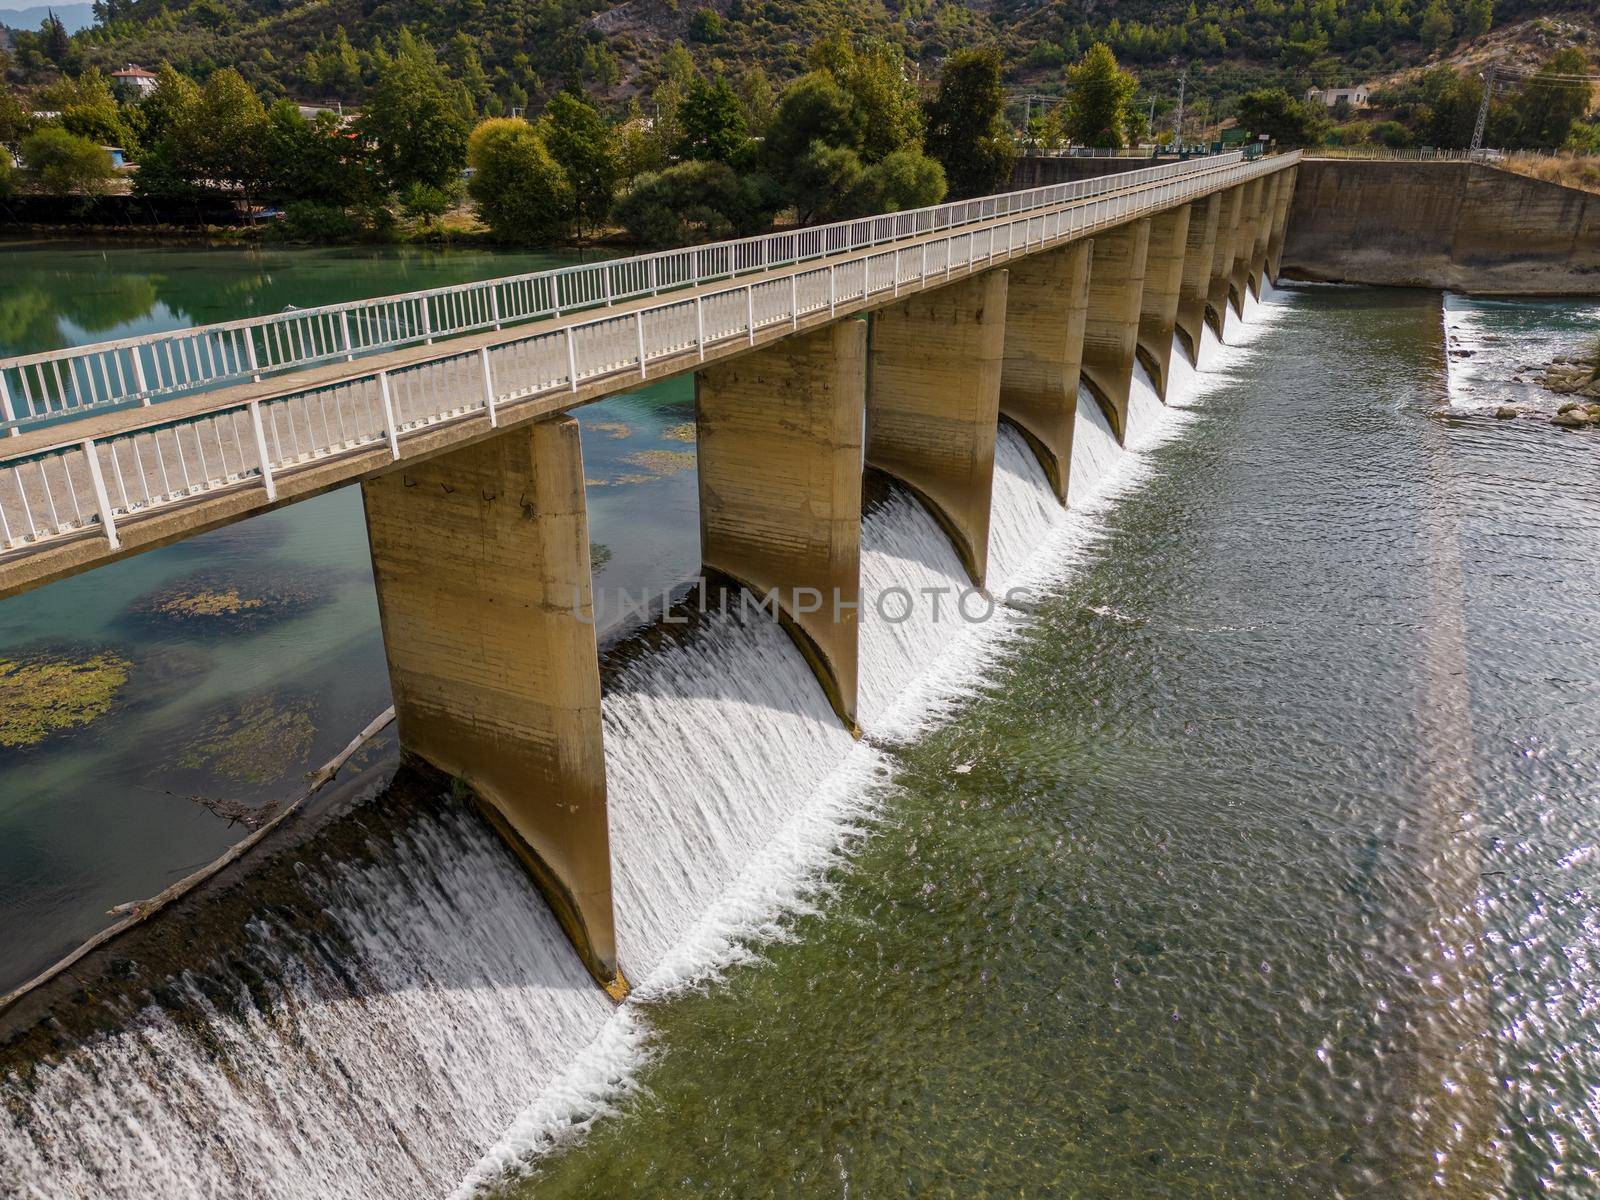 water released from hydroelectric power station